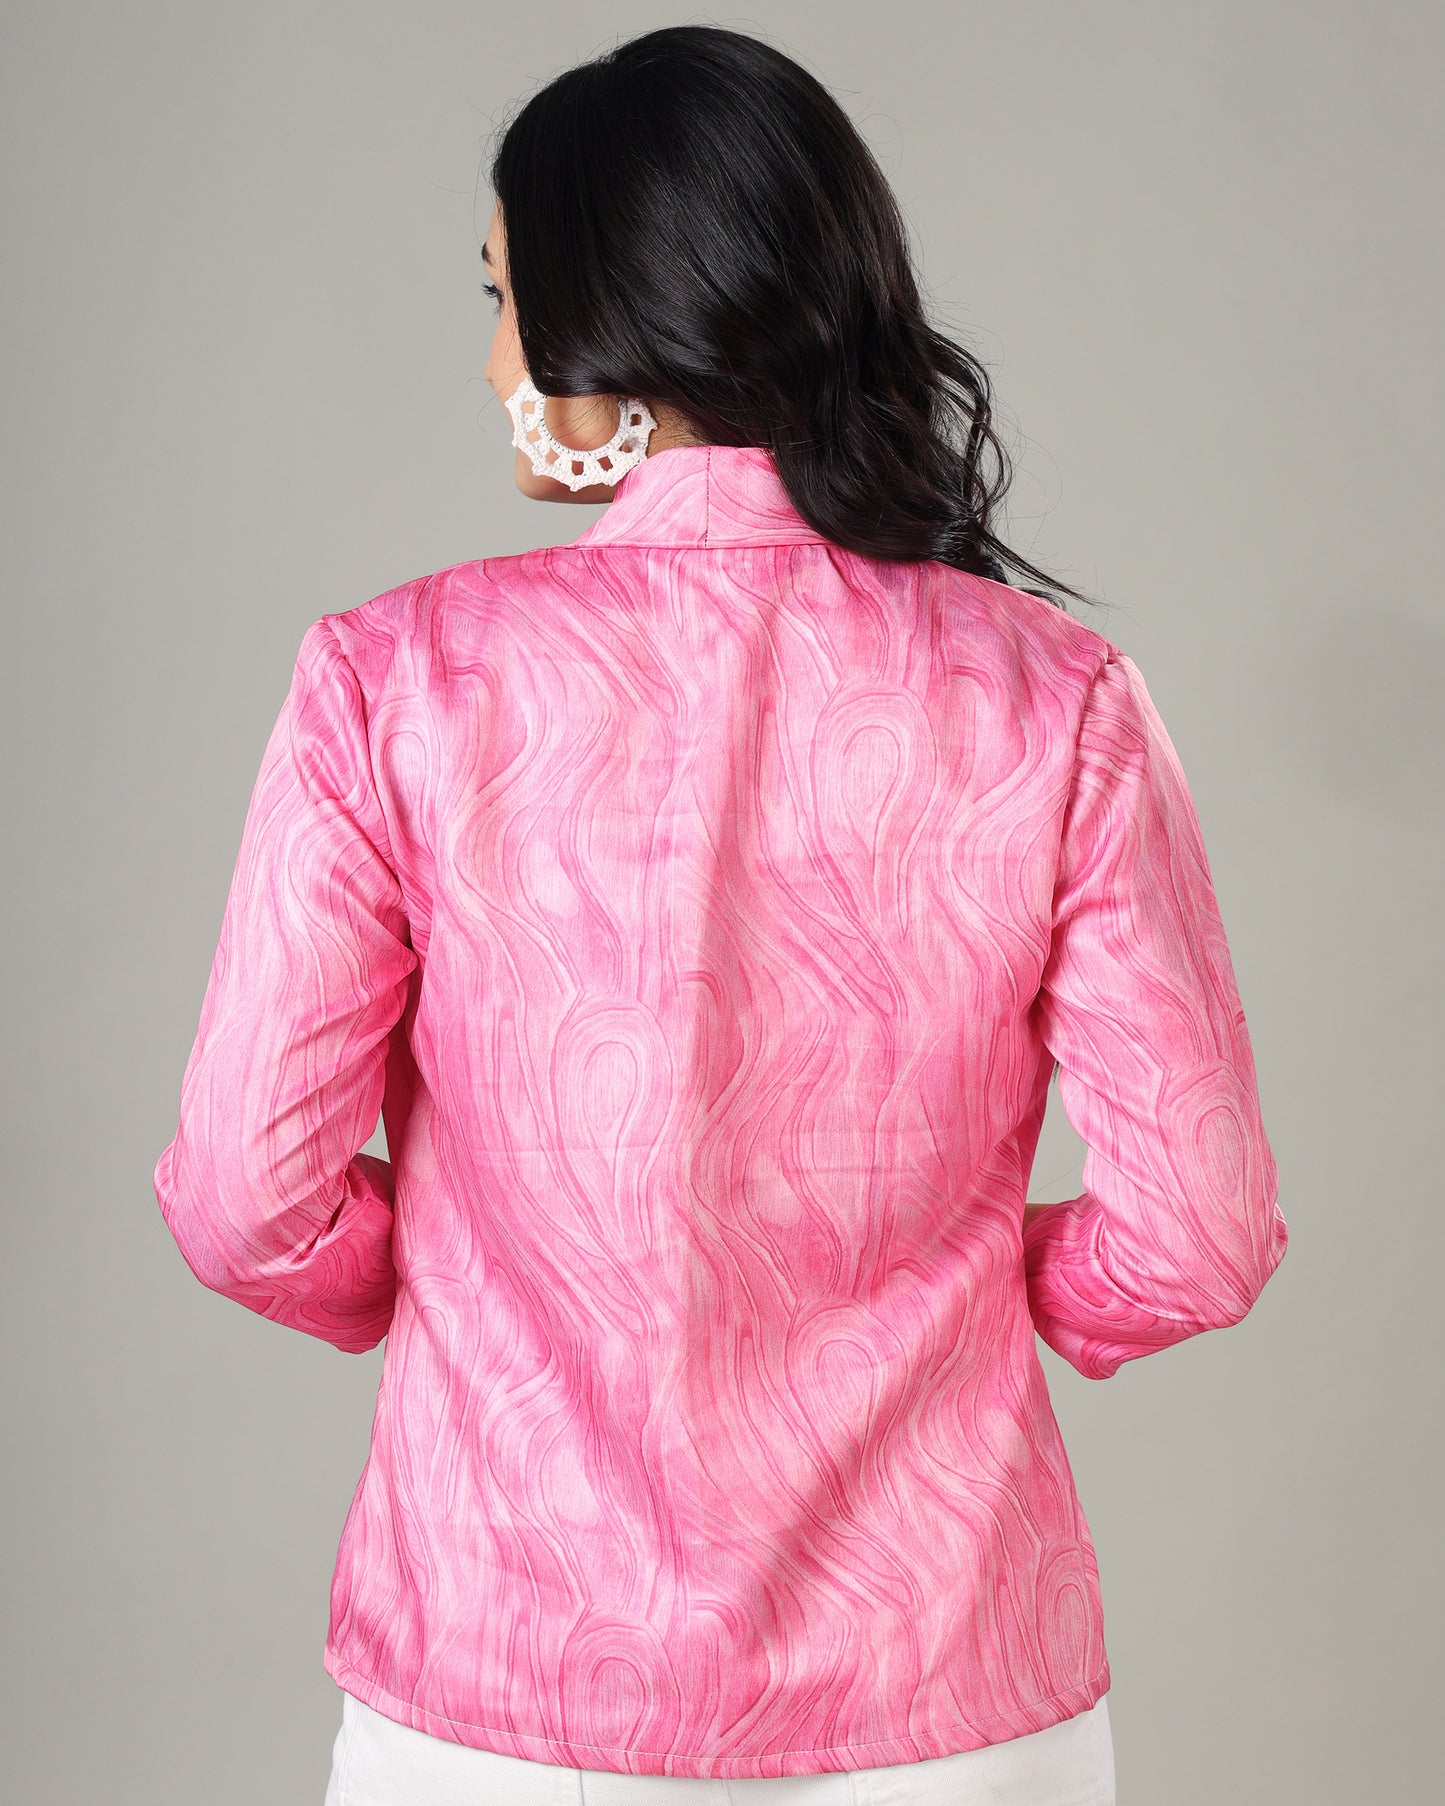 Boost Your Style With This Versatile Women's Jacket